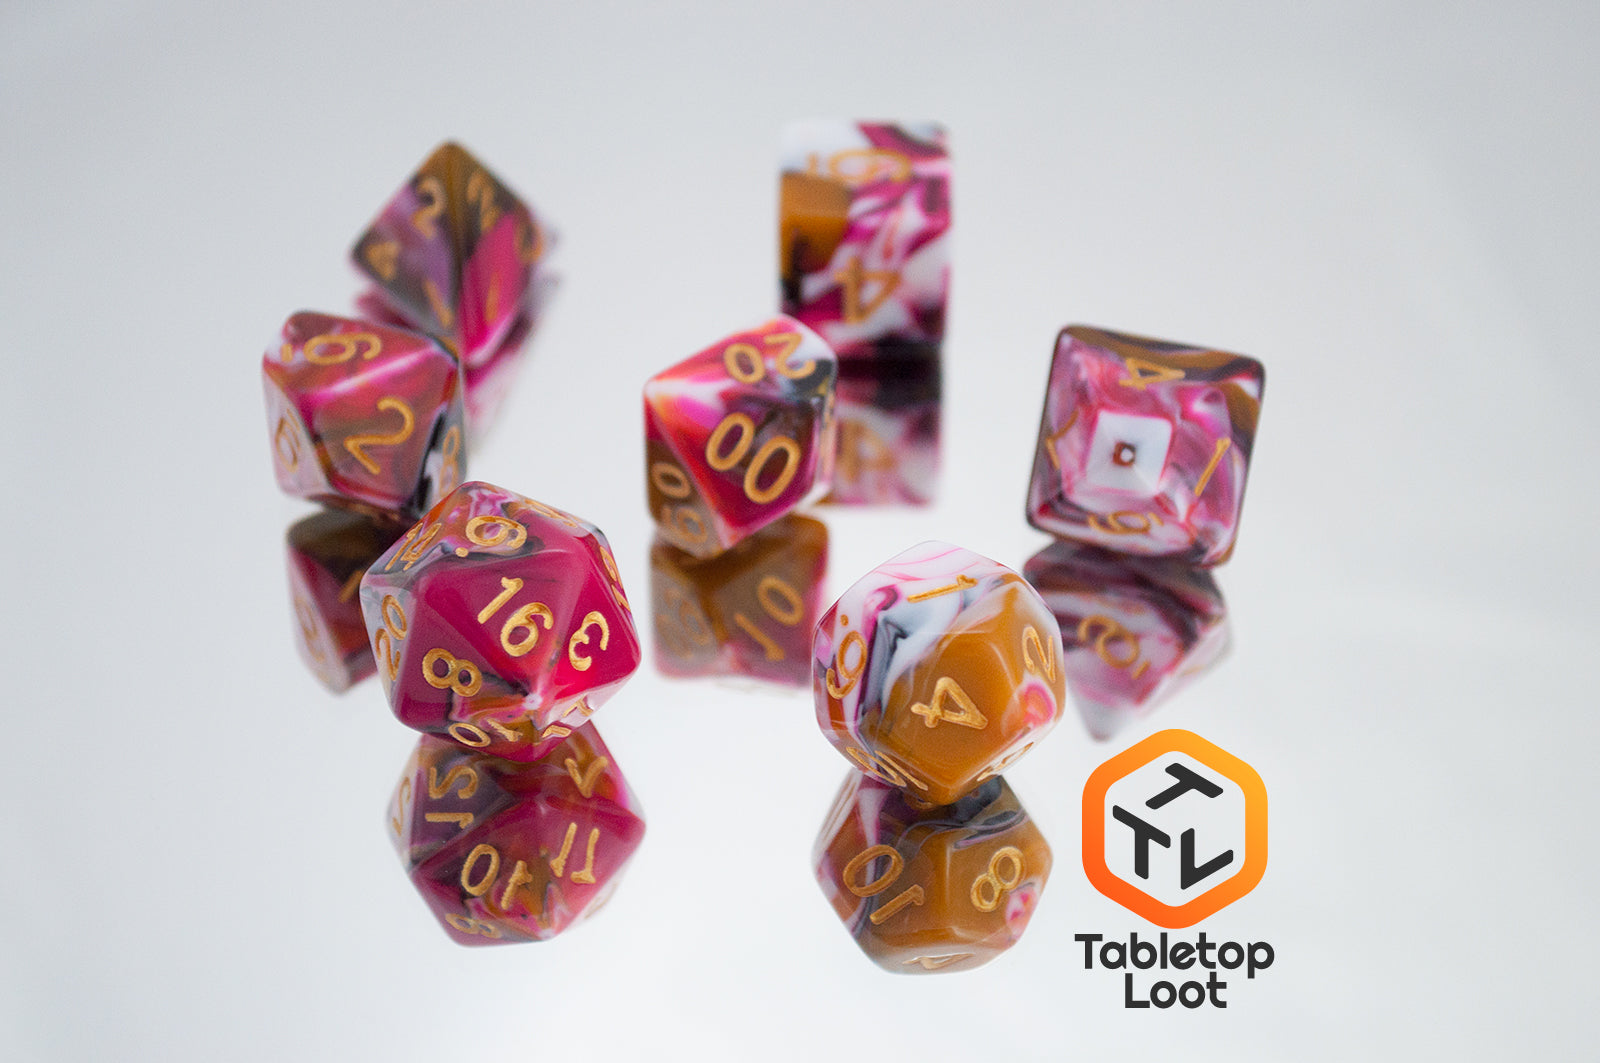 The GoodBerries 7 piece dice set from Tabletop Loot with swirls of red, brown, black, and white and gold numbering.